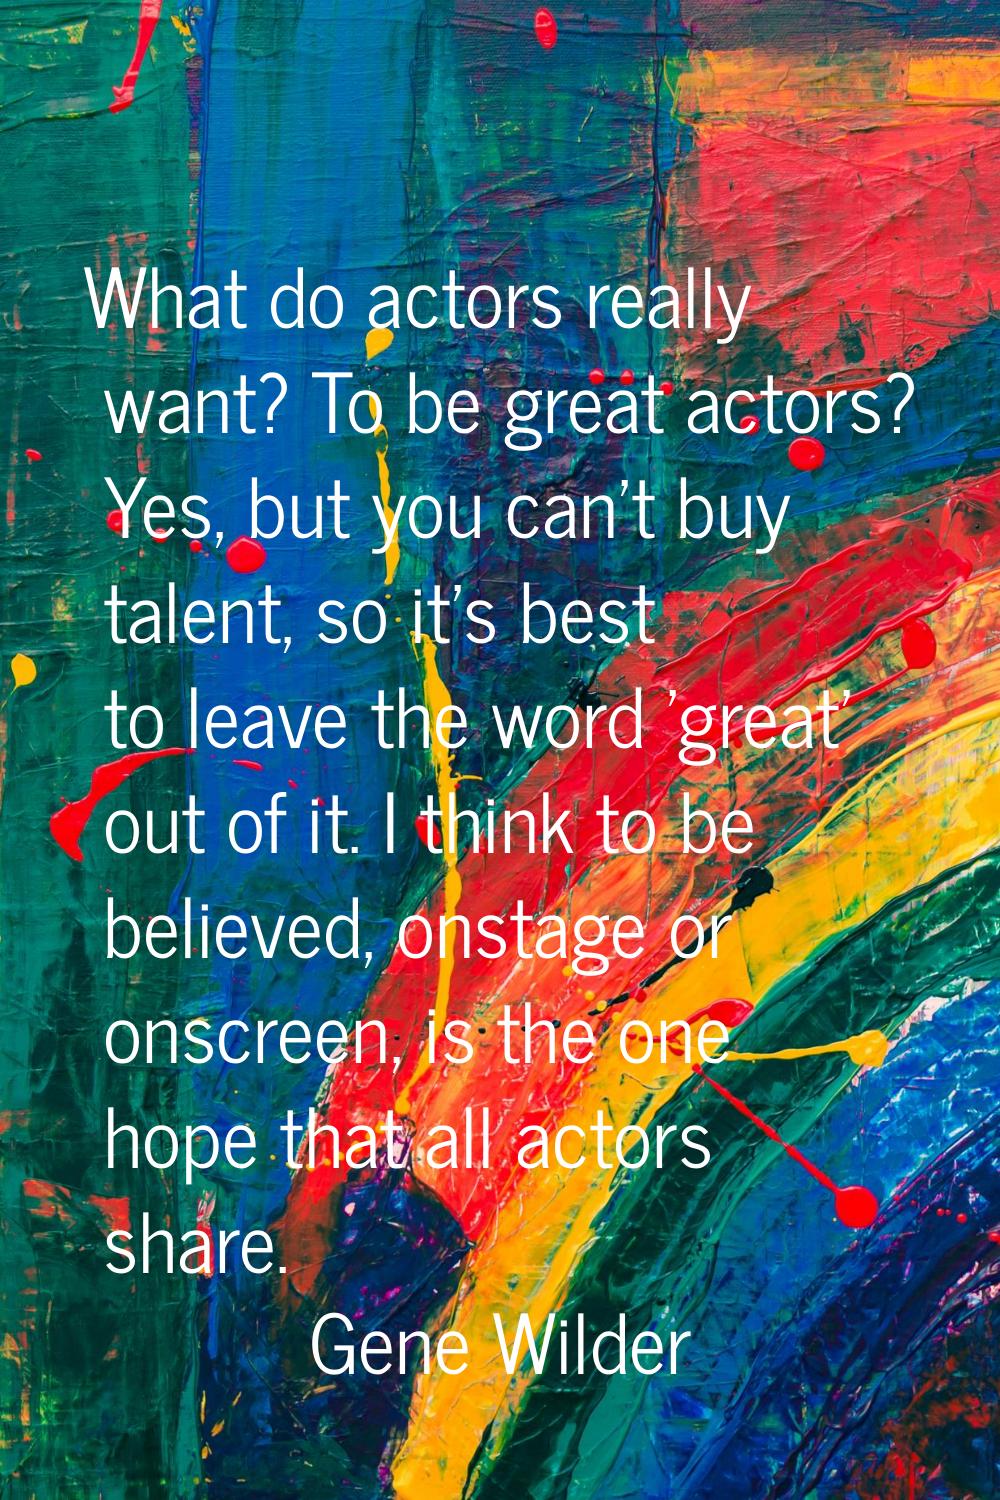 What do actors really want? To be great actors? Yes, but you can't buy talent, so it's best to leav